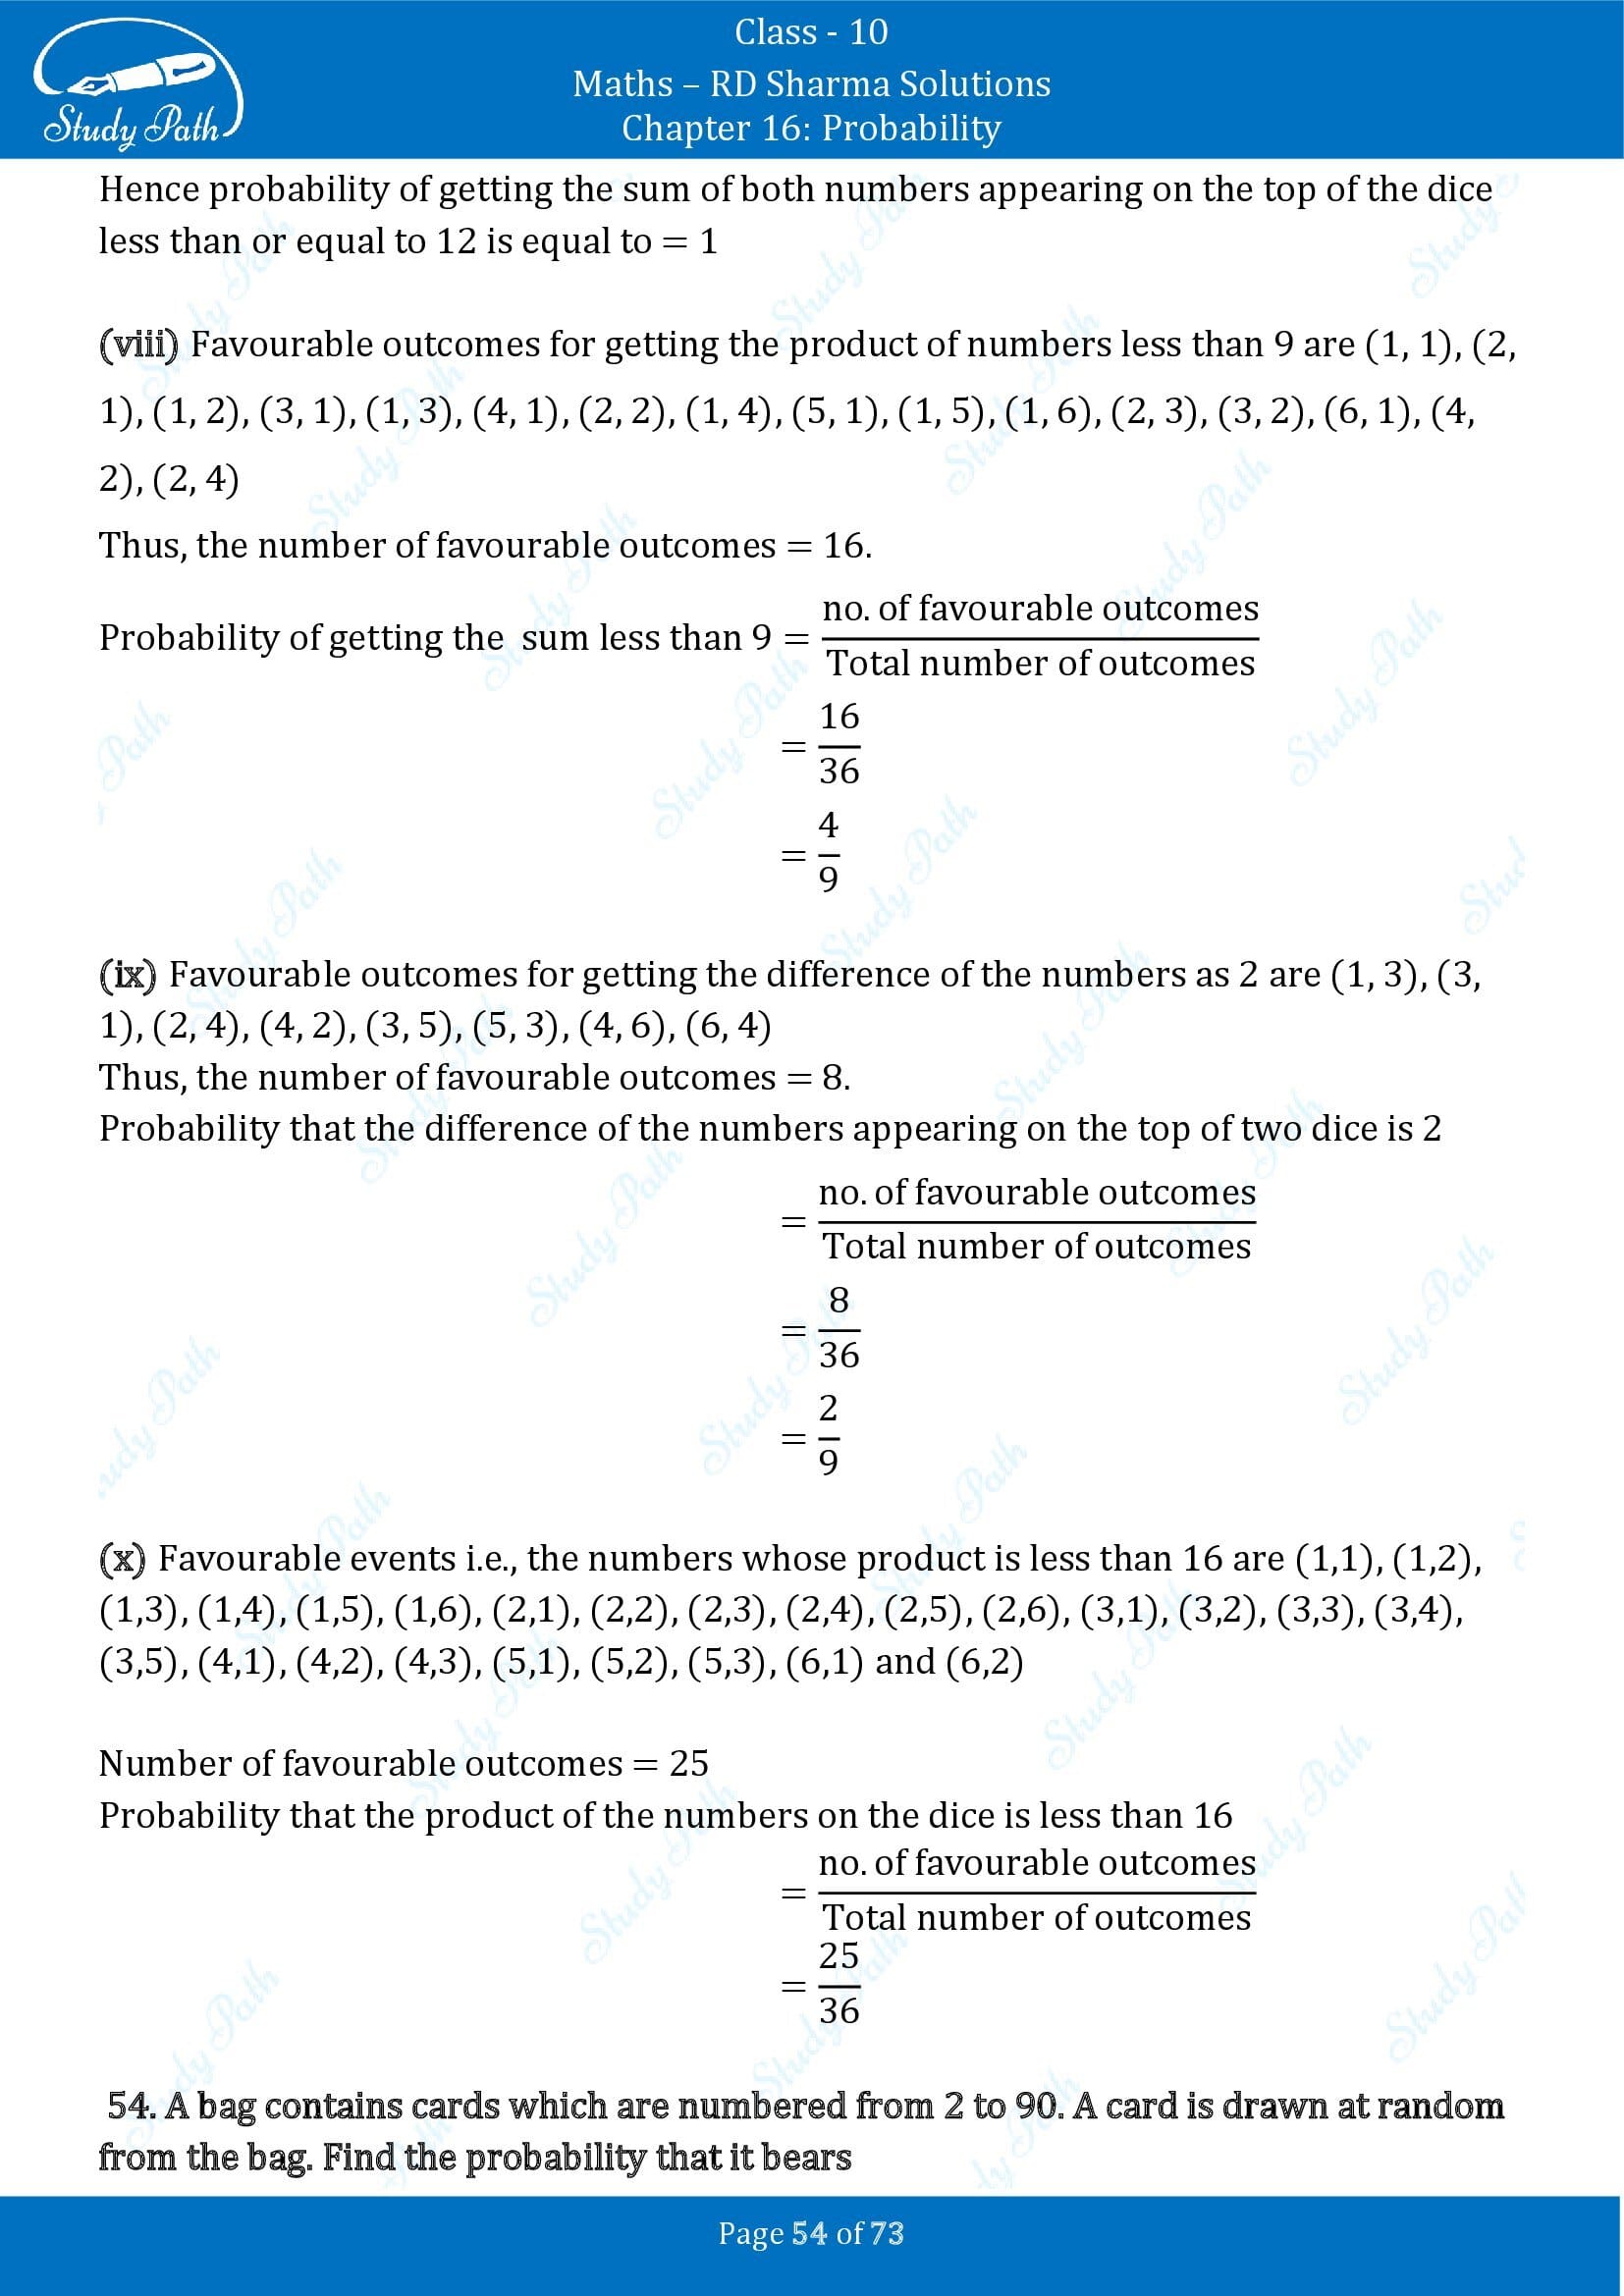 RD Sharma Solutions Class 10 Chapter 16 Probability Exercise 16.1 00054